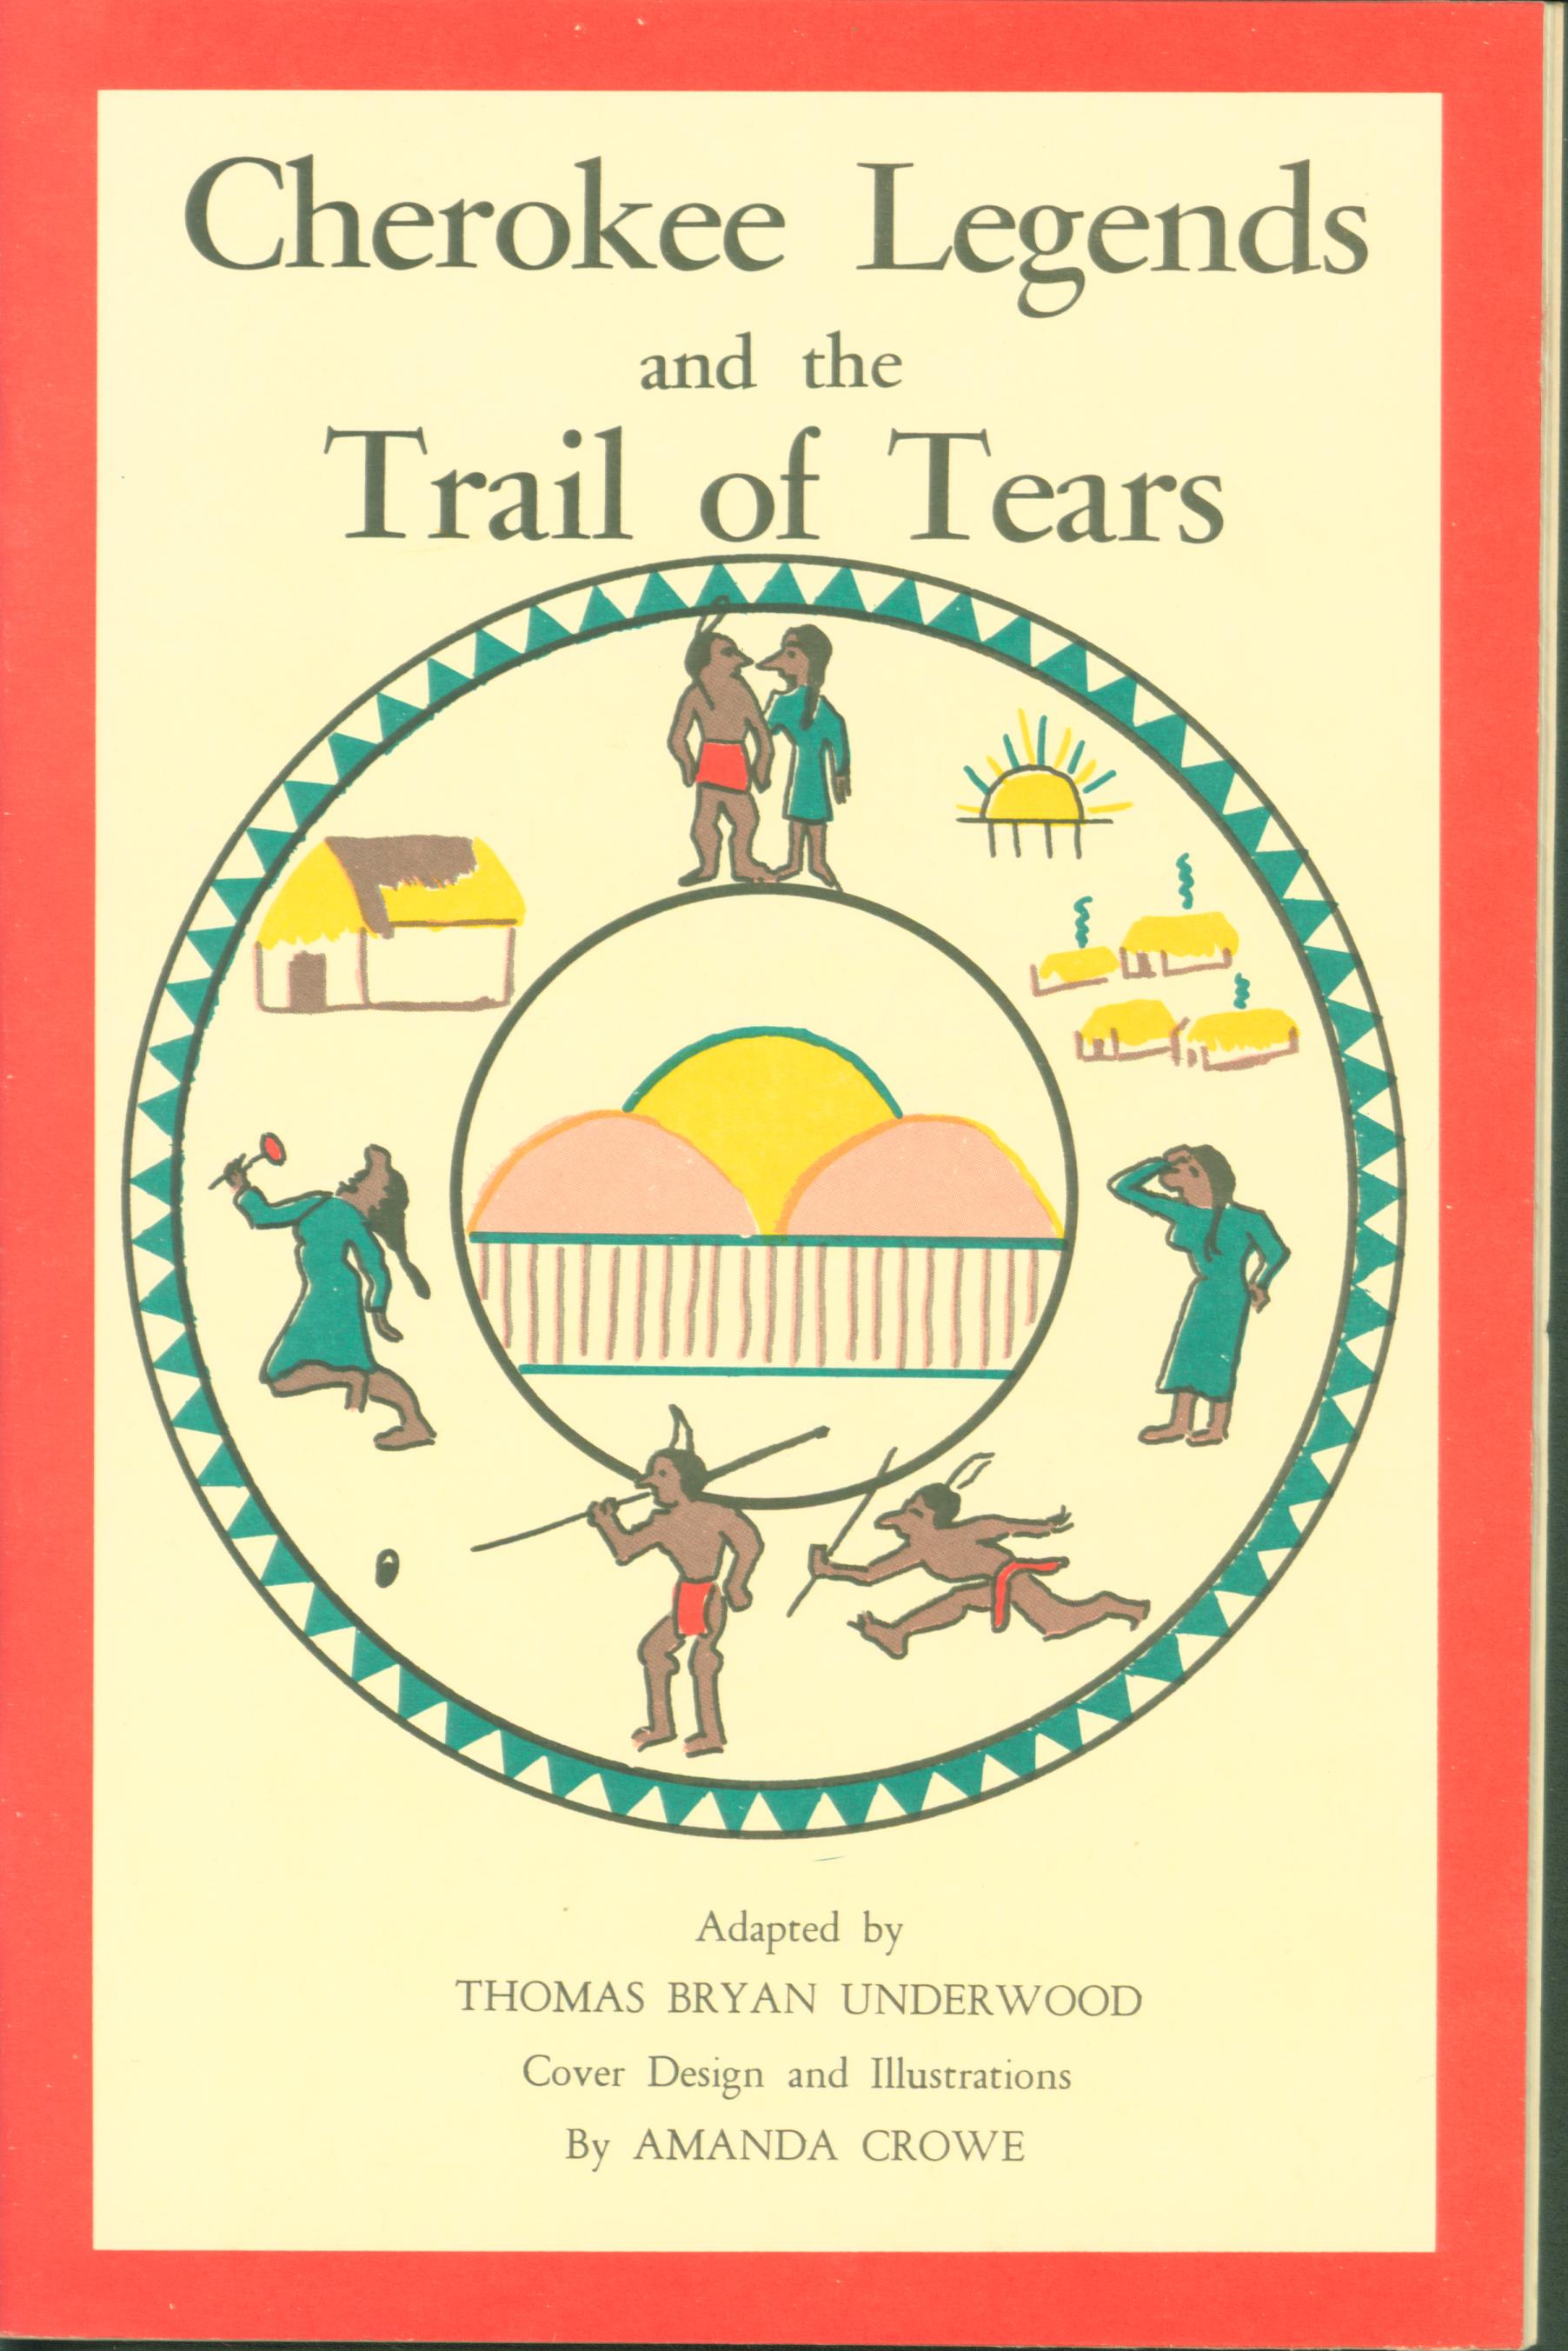 CHEROKEE LEGENDS AND THE TRAIL OF TEARS. 